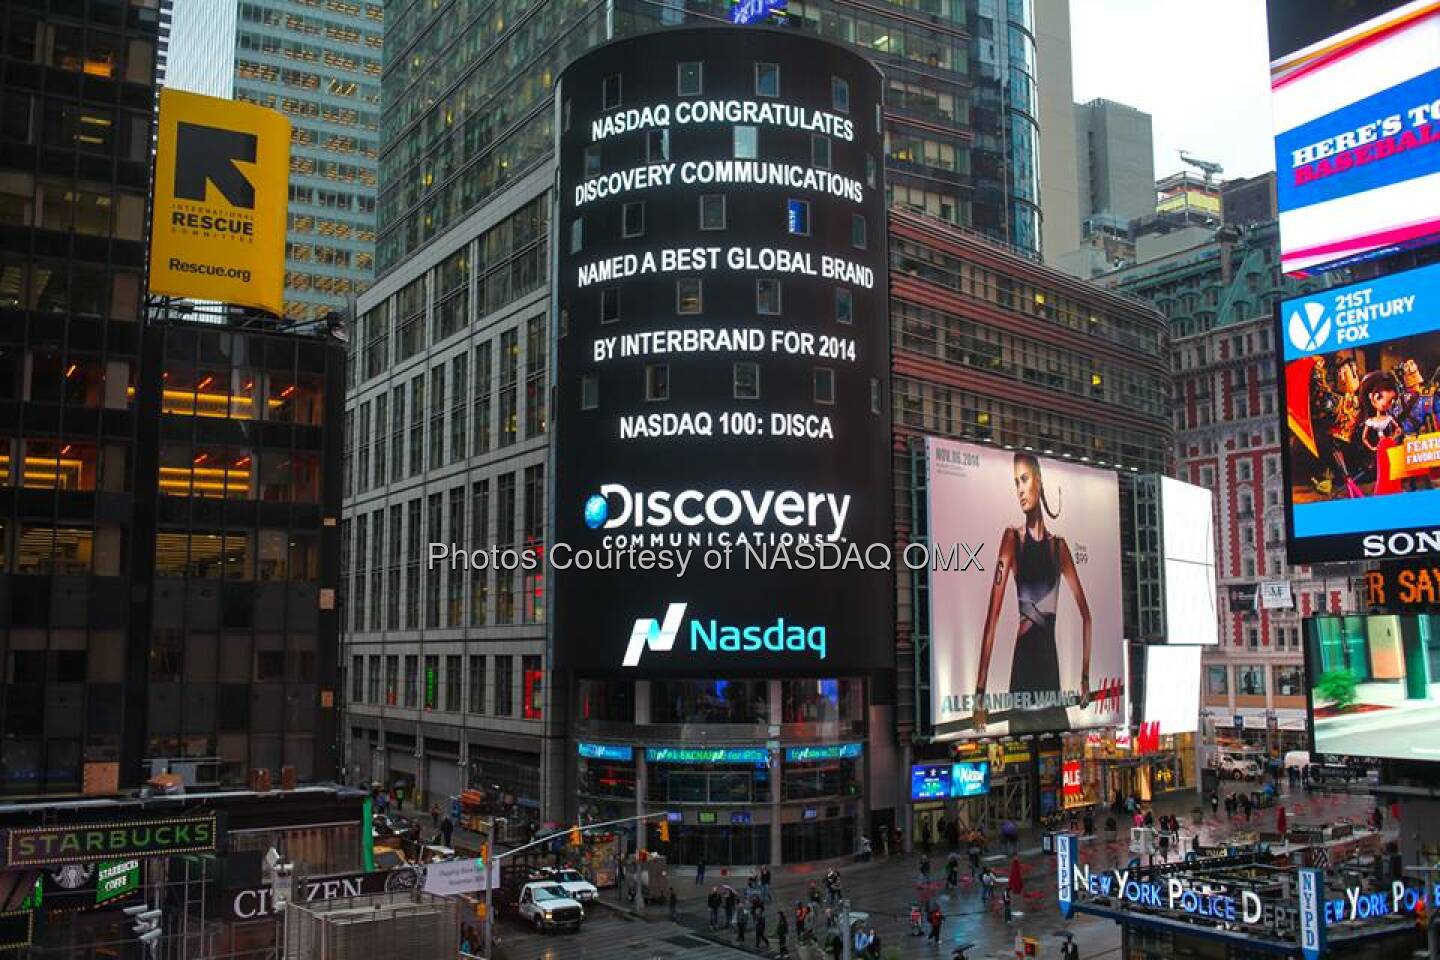 Nasdaq congratulates Discovery Communications, named a best global brand by Interbrand! #dreamBIG Discovery $DISCA http://spr.ly/6180qqRM  Source: http://facebook.com/NASDAQ